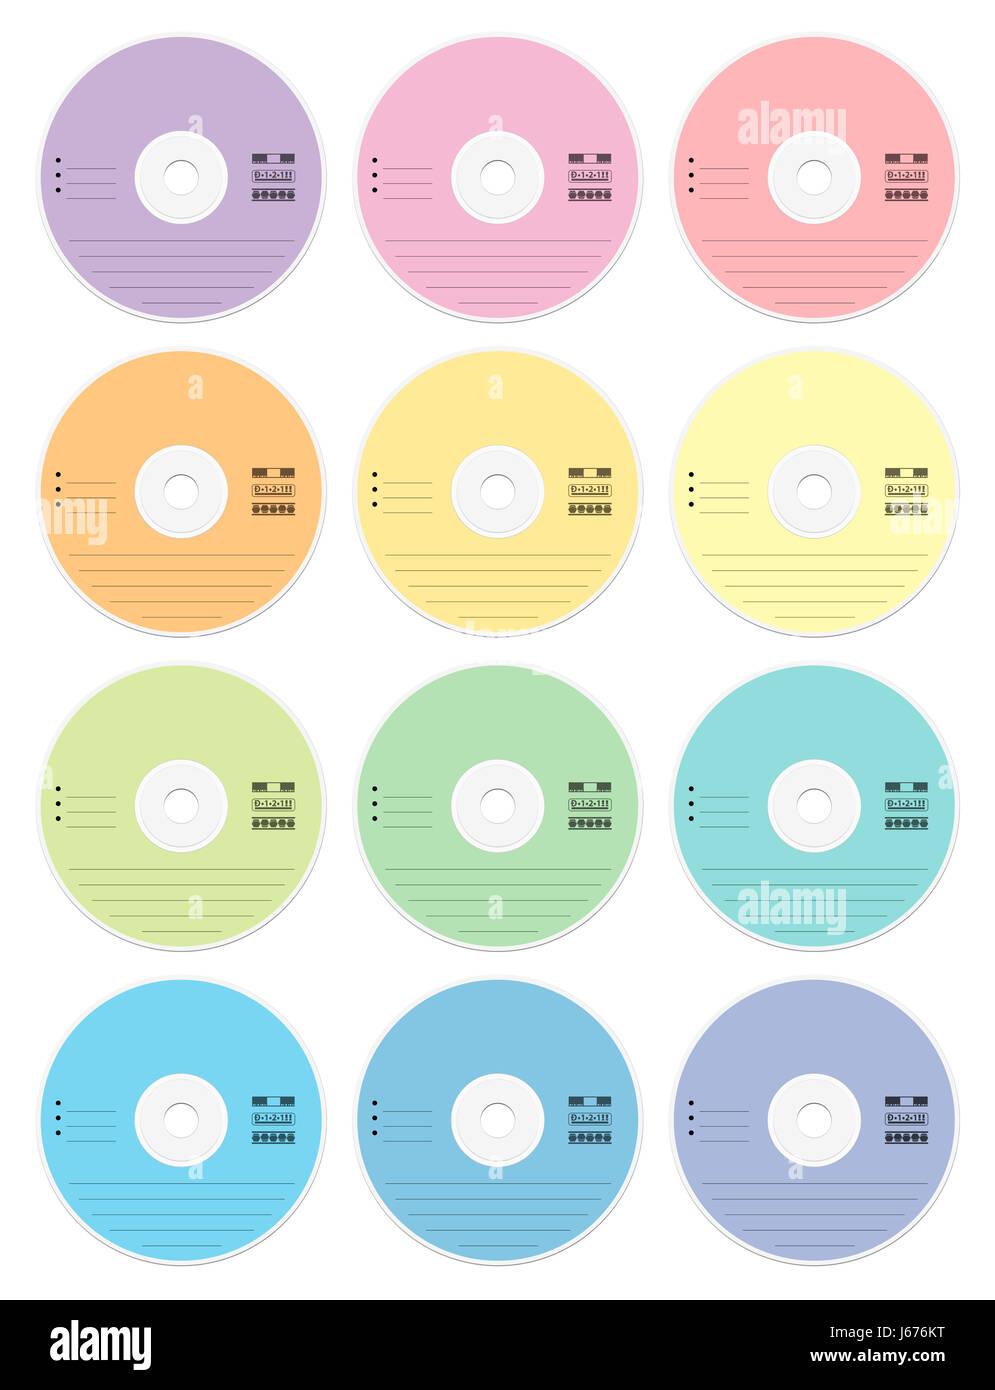 CD blanks - pastel colors set of twelve CDs or DVDs - external media data collection storage for music, films, photos, documents. Stock Photo